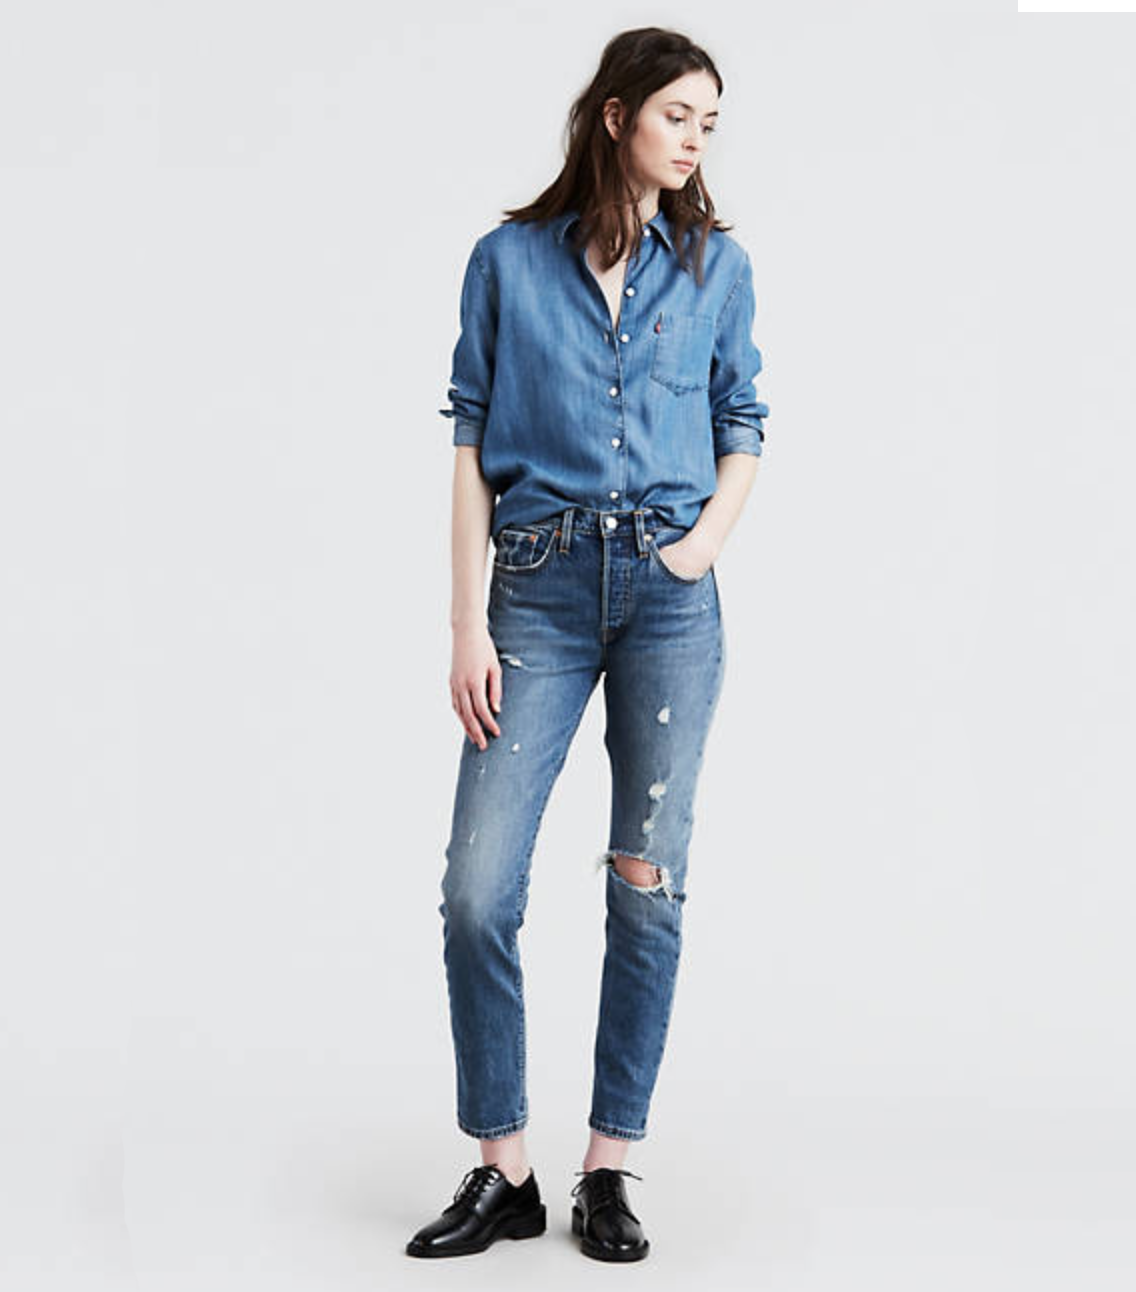 These Are the 10 Best High-QualityJean Brands | Who What Wear